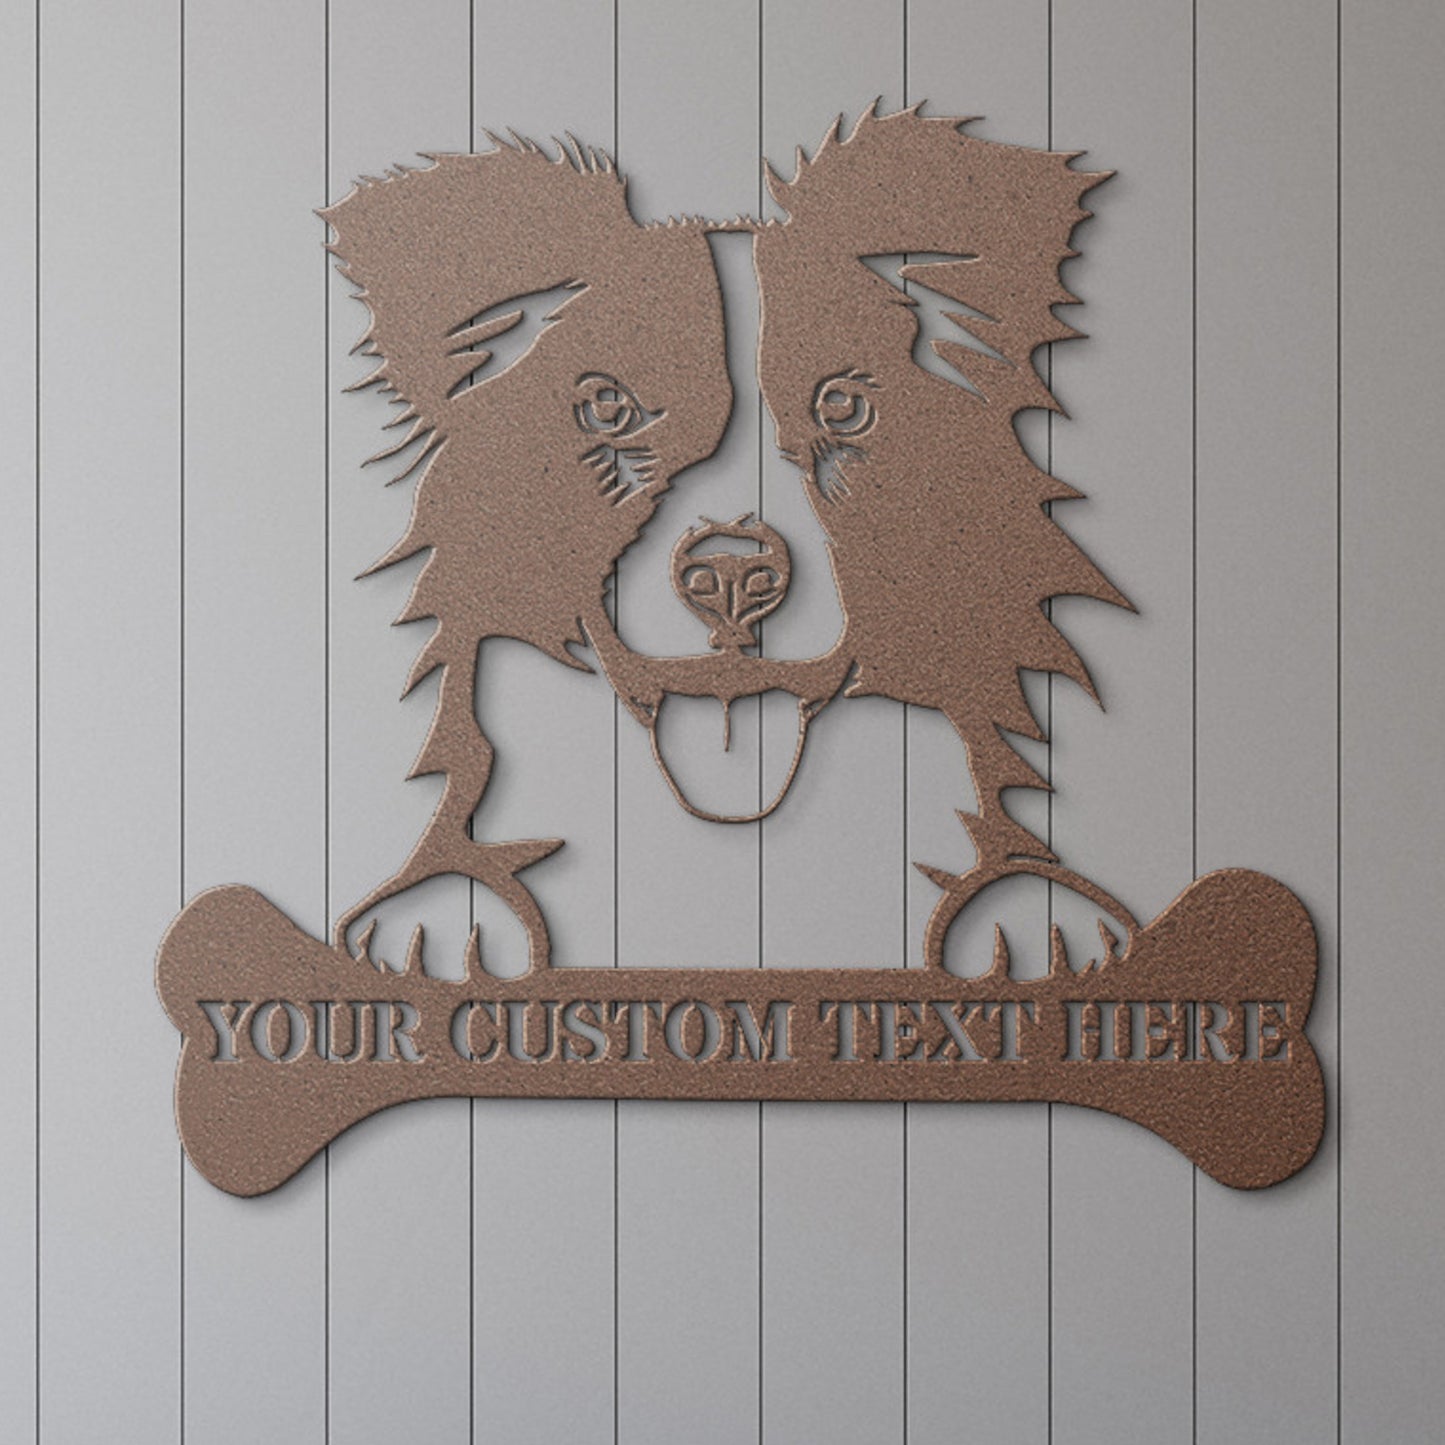 Personalized Border Collie Name Metal Sign. Customizable Dog Owner Wall Decor Gift. Border Collie Portrait Yard Sign. Dog House Name Sign